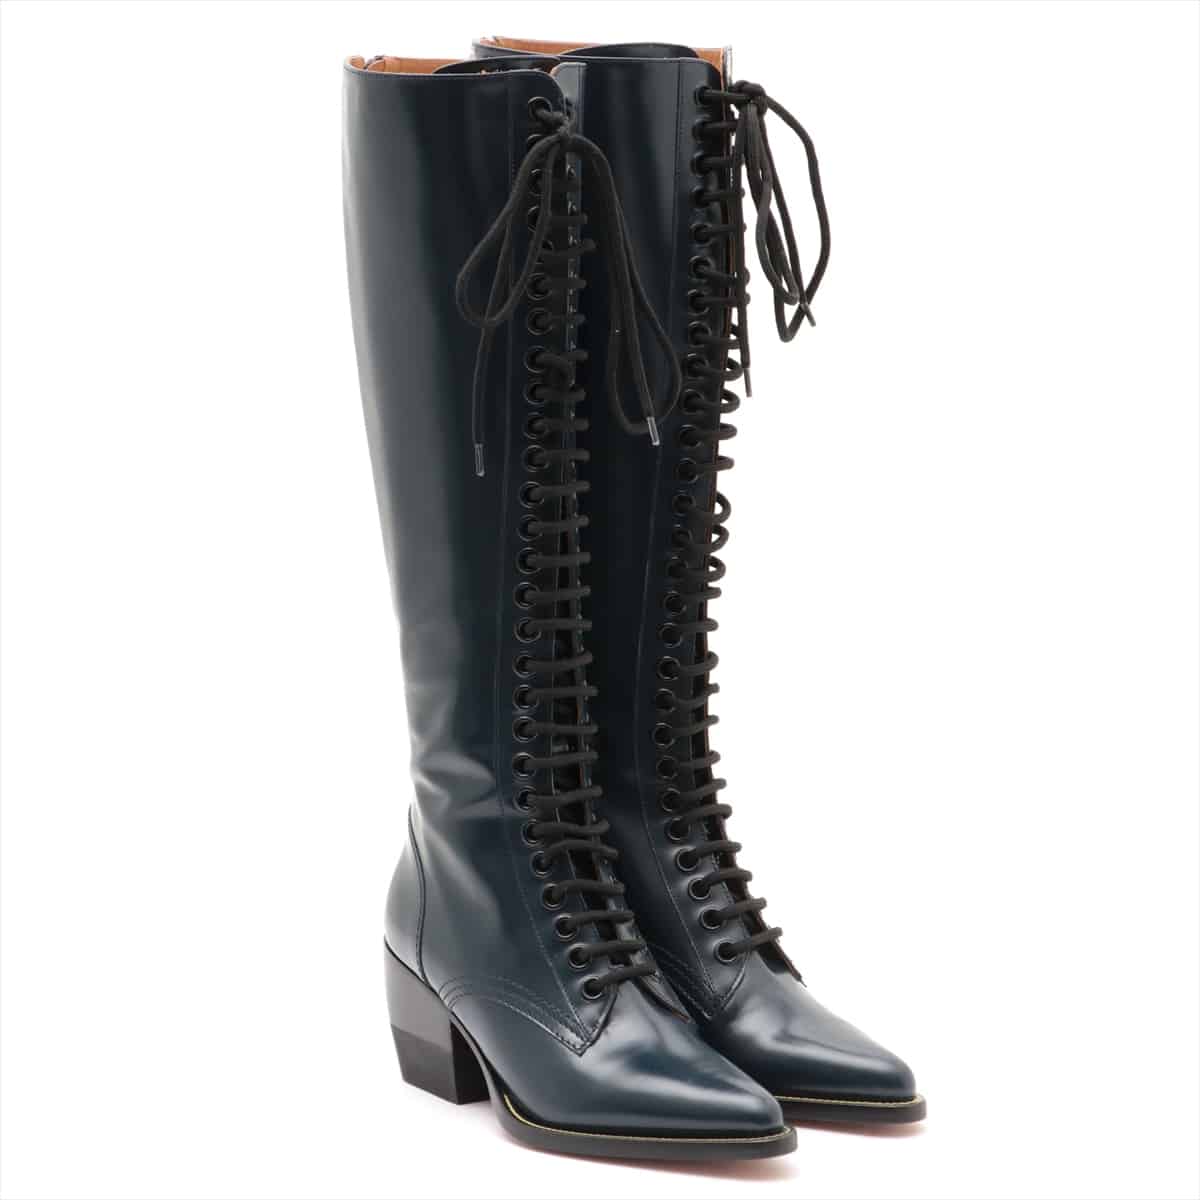 Chloe Leather Boots 37 Ladies' Navy blue